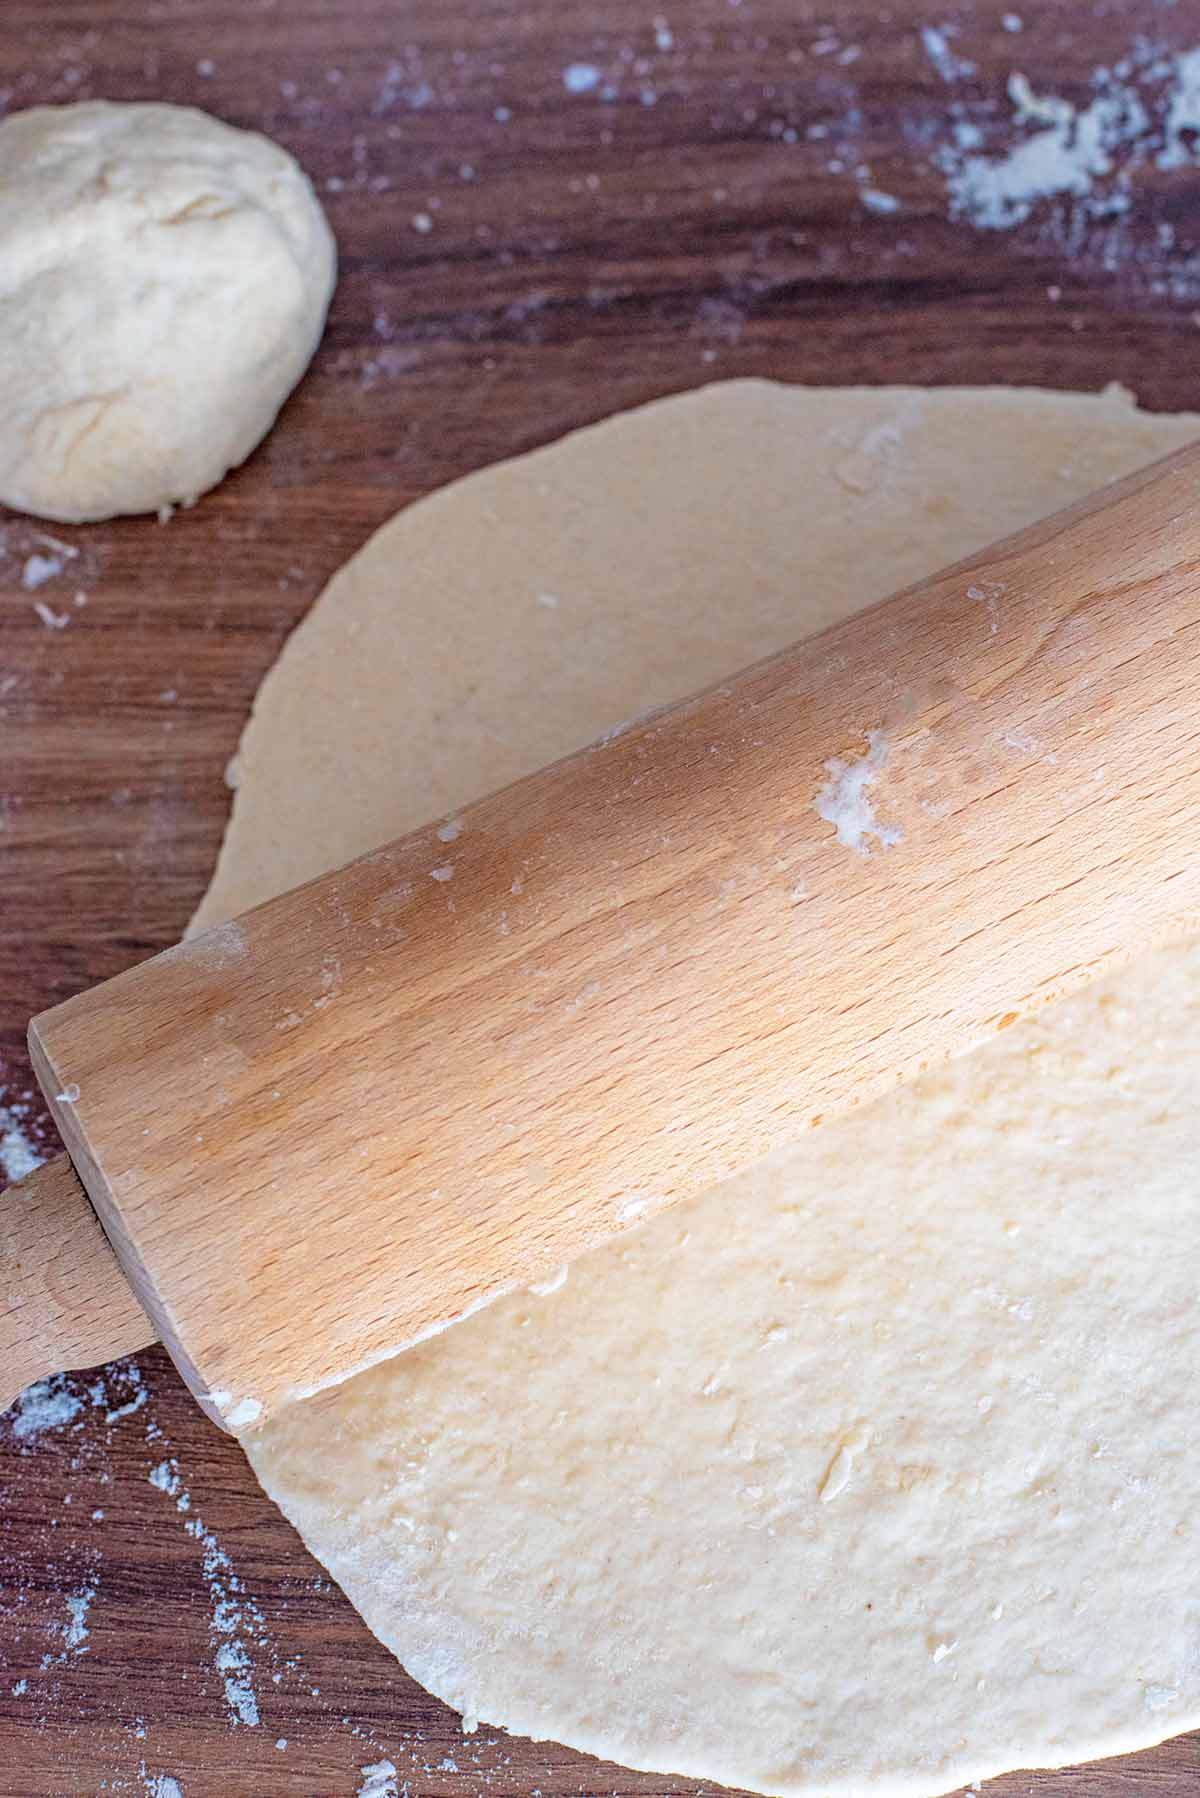 A ball of dough next to rolled out dough and a rolling pin.